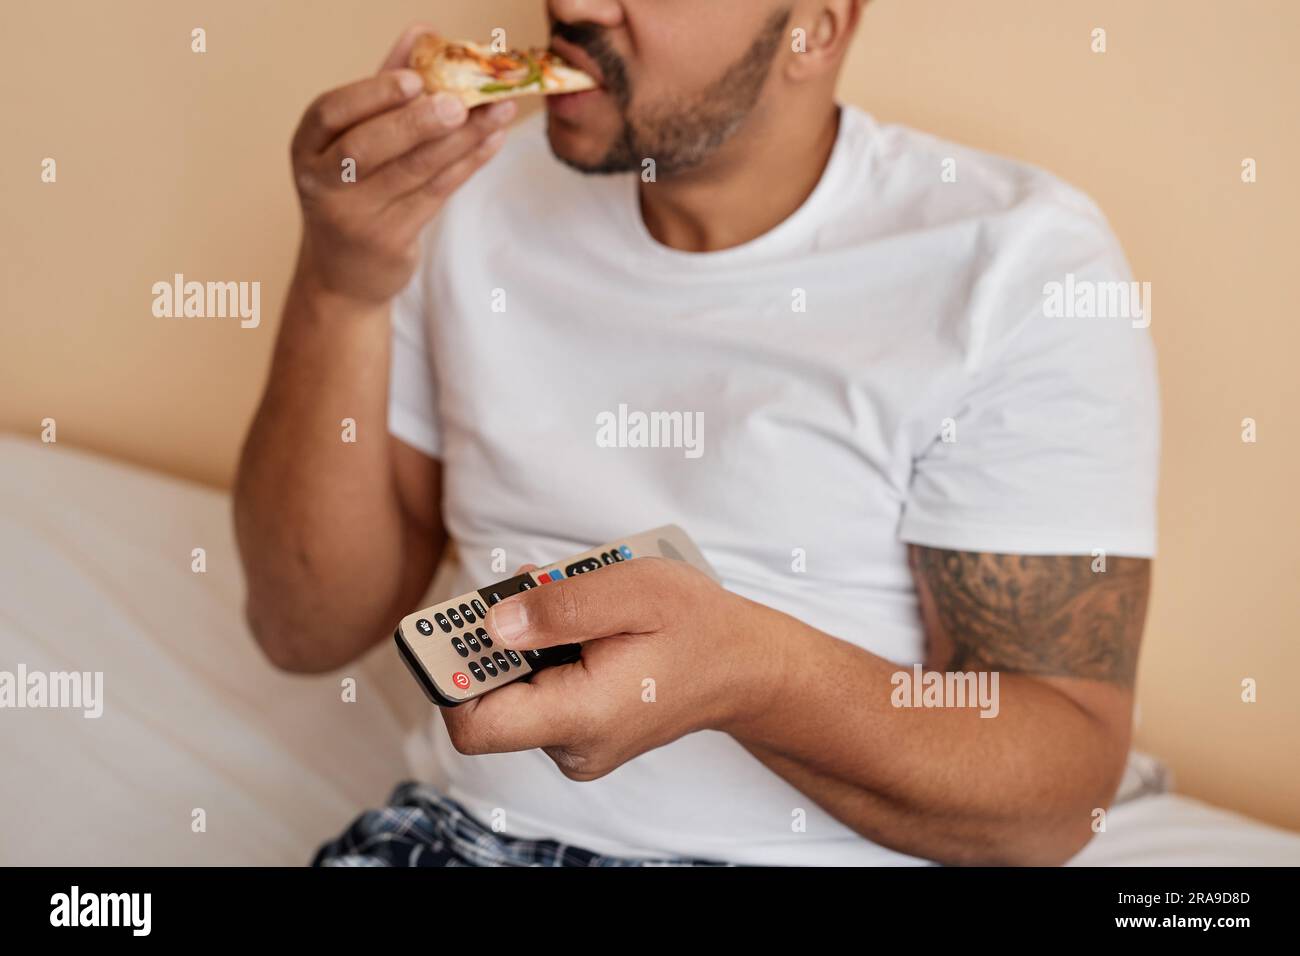 Closeup of tattooed man eating pizza at home and holding remote control while enjoying relaxing weekend Stock Photo